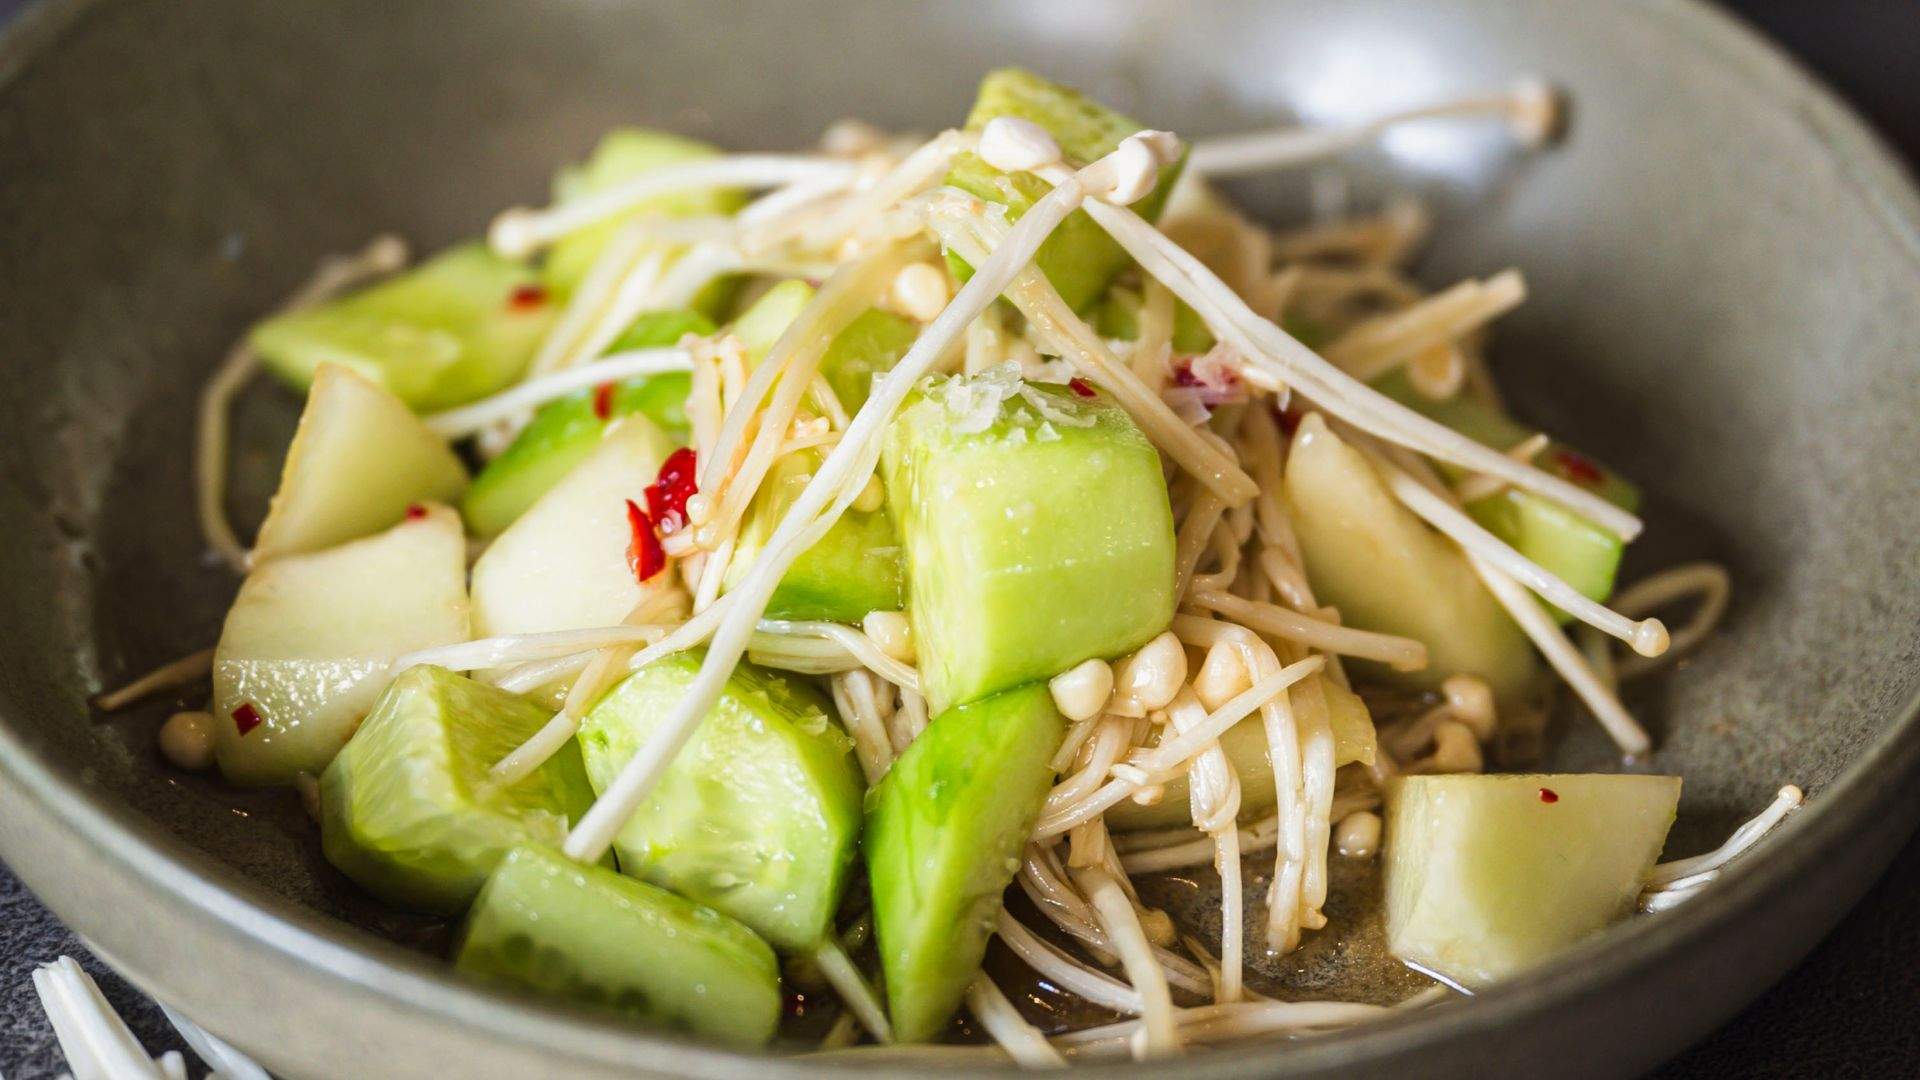 Cucumber, piel de sapo & enoki salad with hot & sour dressing & rice noodles from Mitch Orr's monthly menu takeover for November 2023 at Two Good Co Cafe.